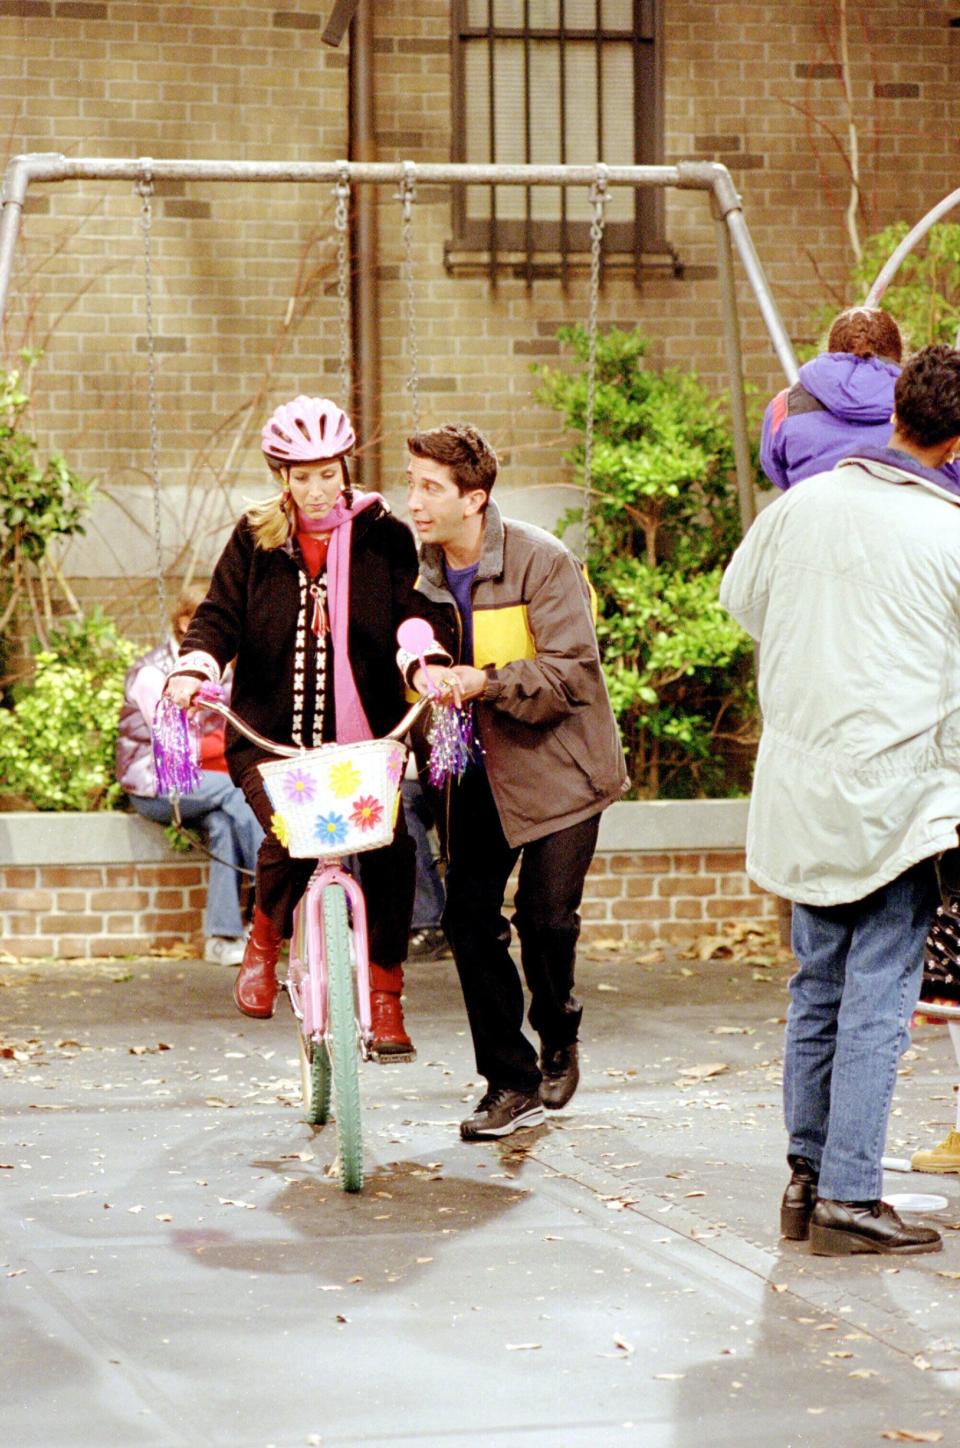 Ross helping Phoebe learn to ride a bike